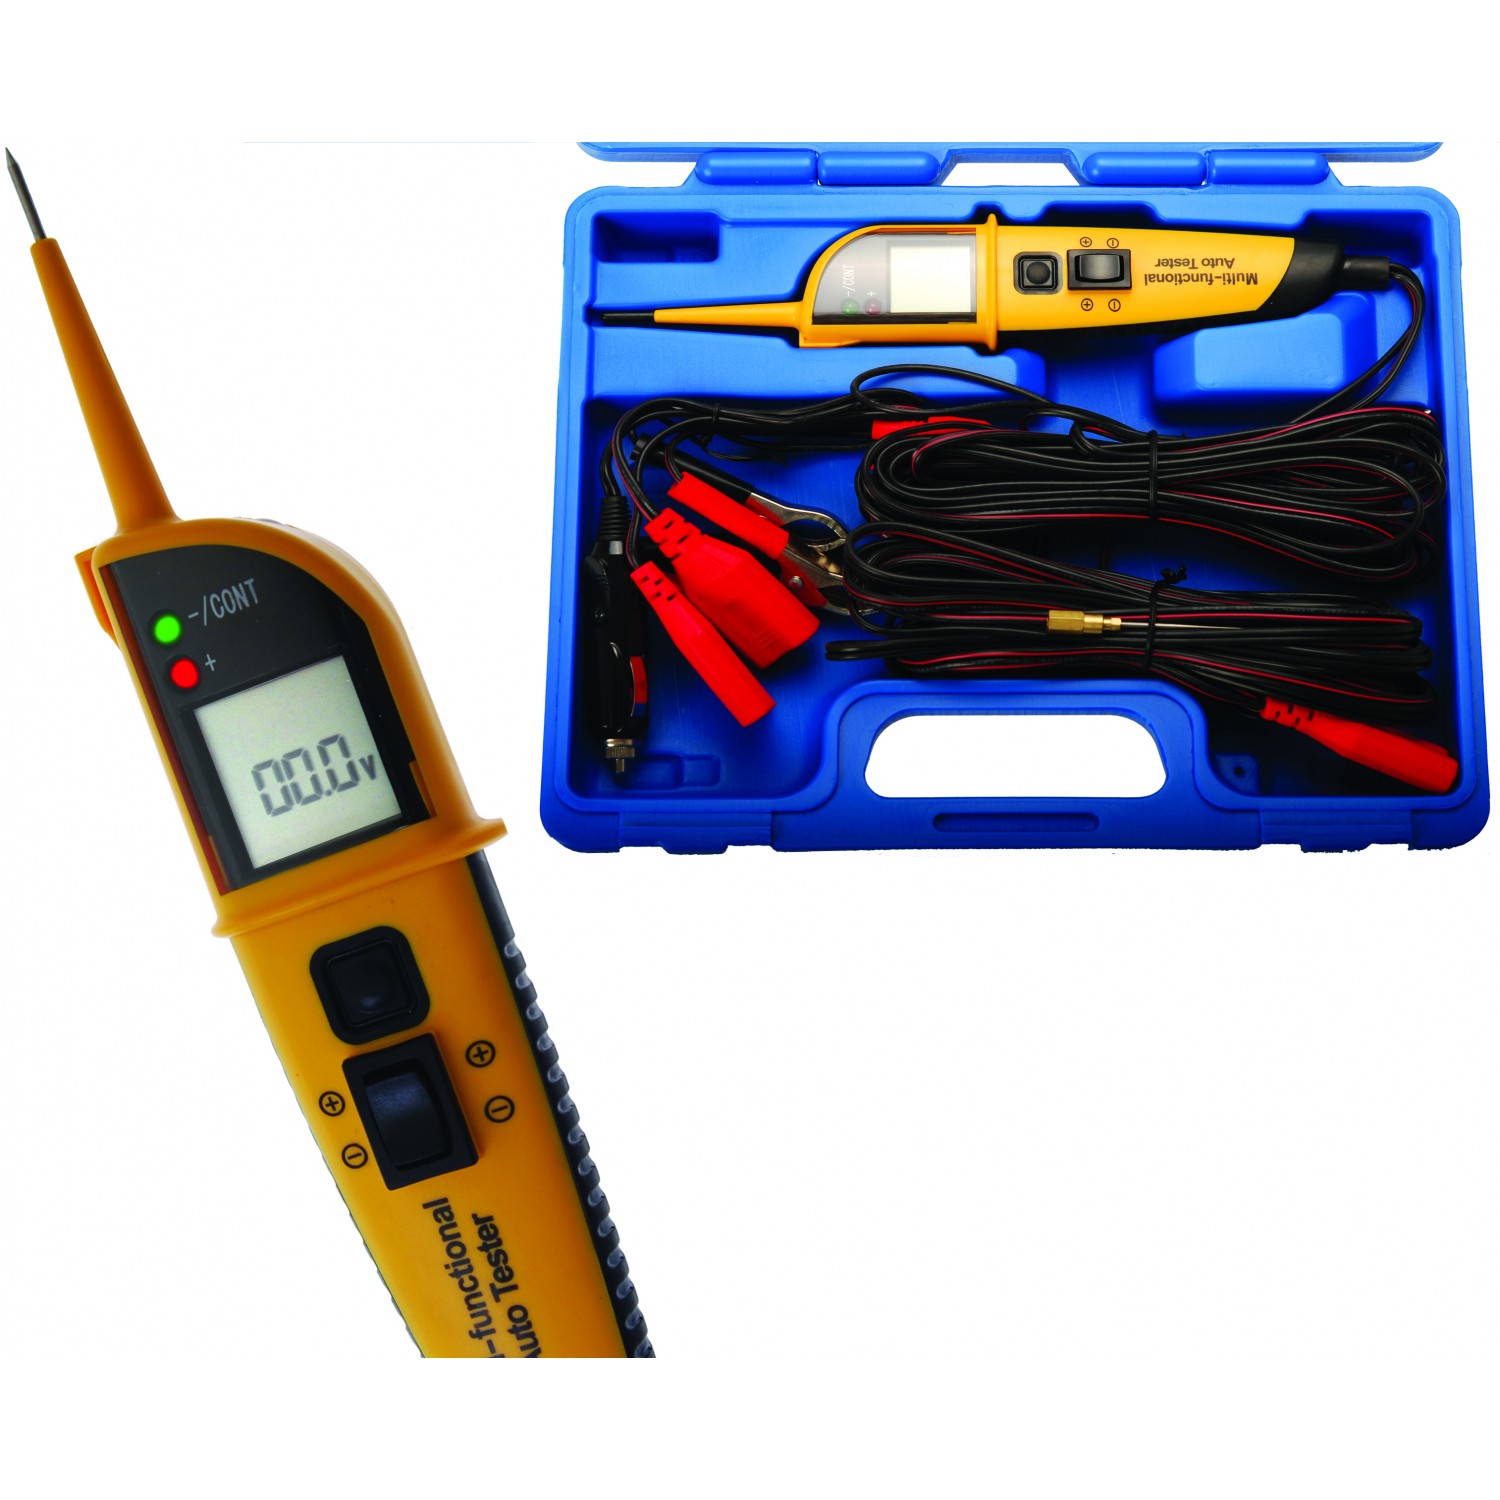 Voltage Tester / Multifunction-Probe with Display and 8 Features (40105)